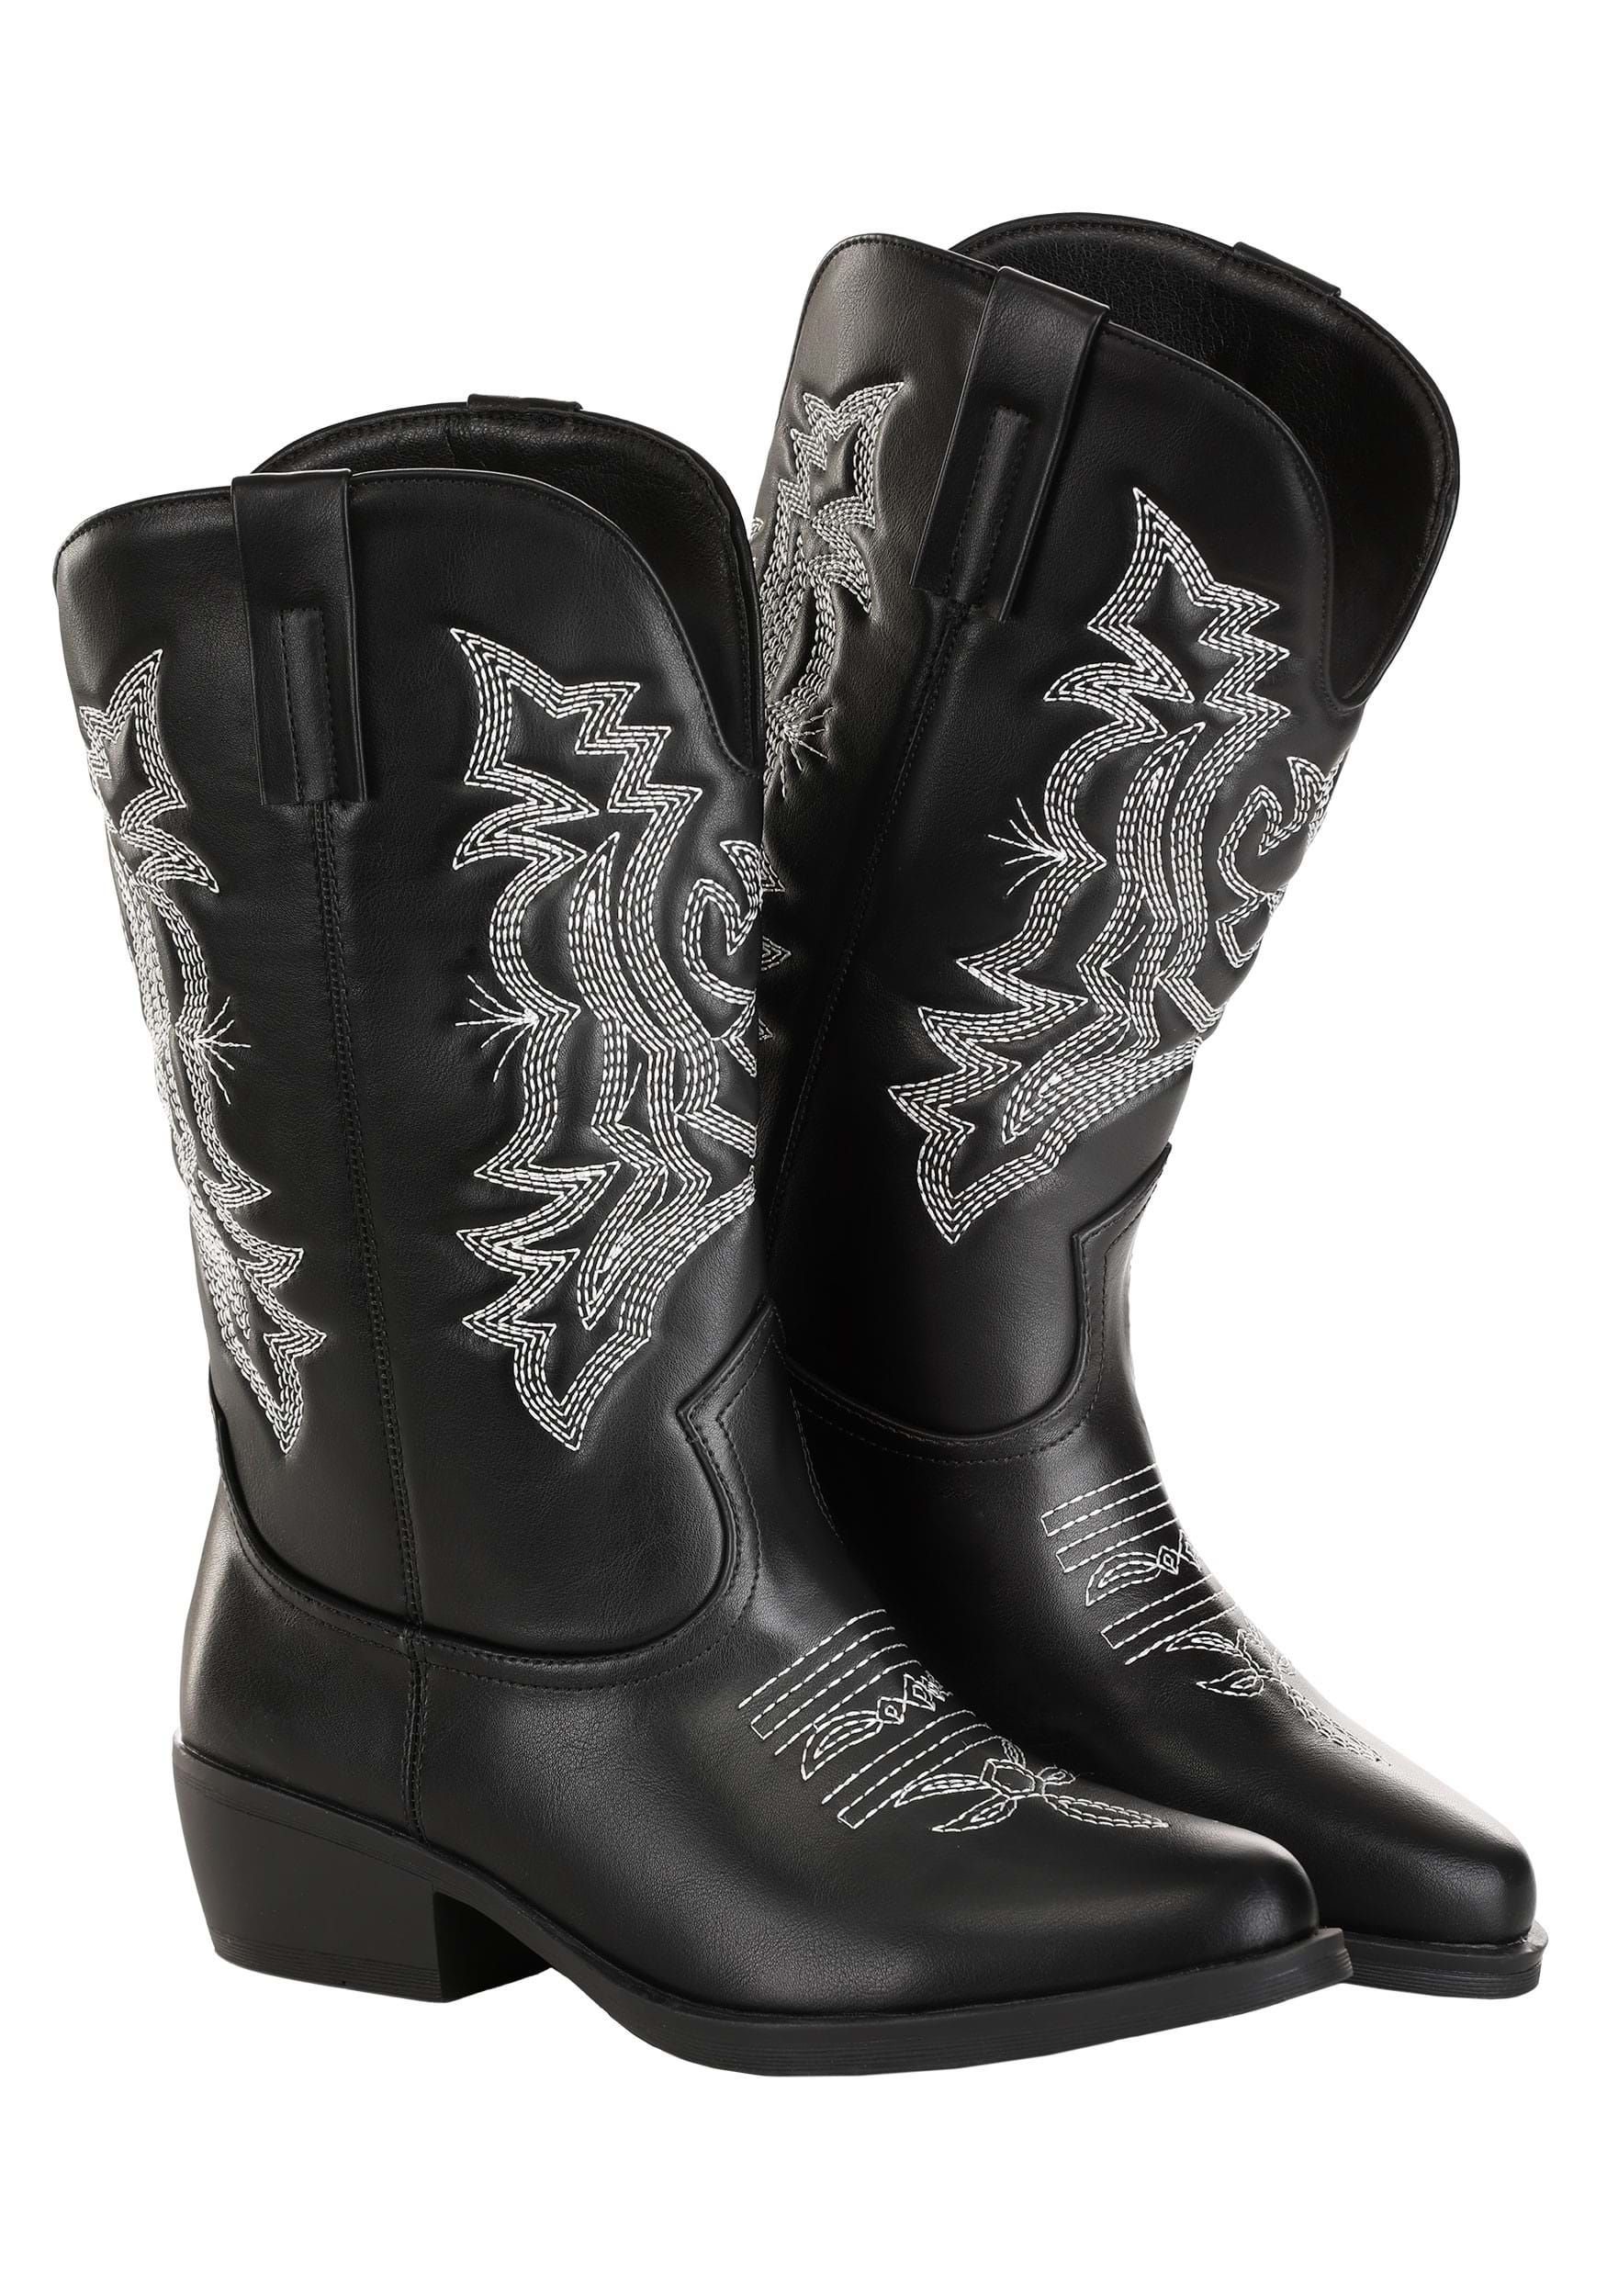 Women's Black Cowgirl Boots , Cowboy Boots